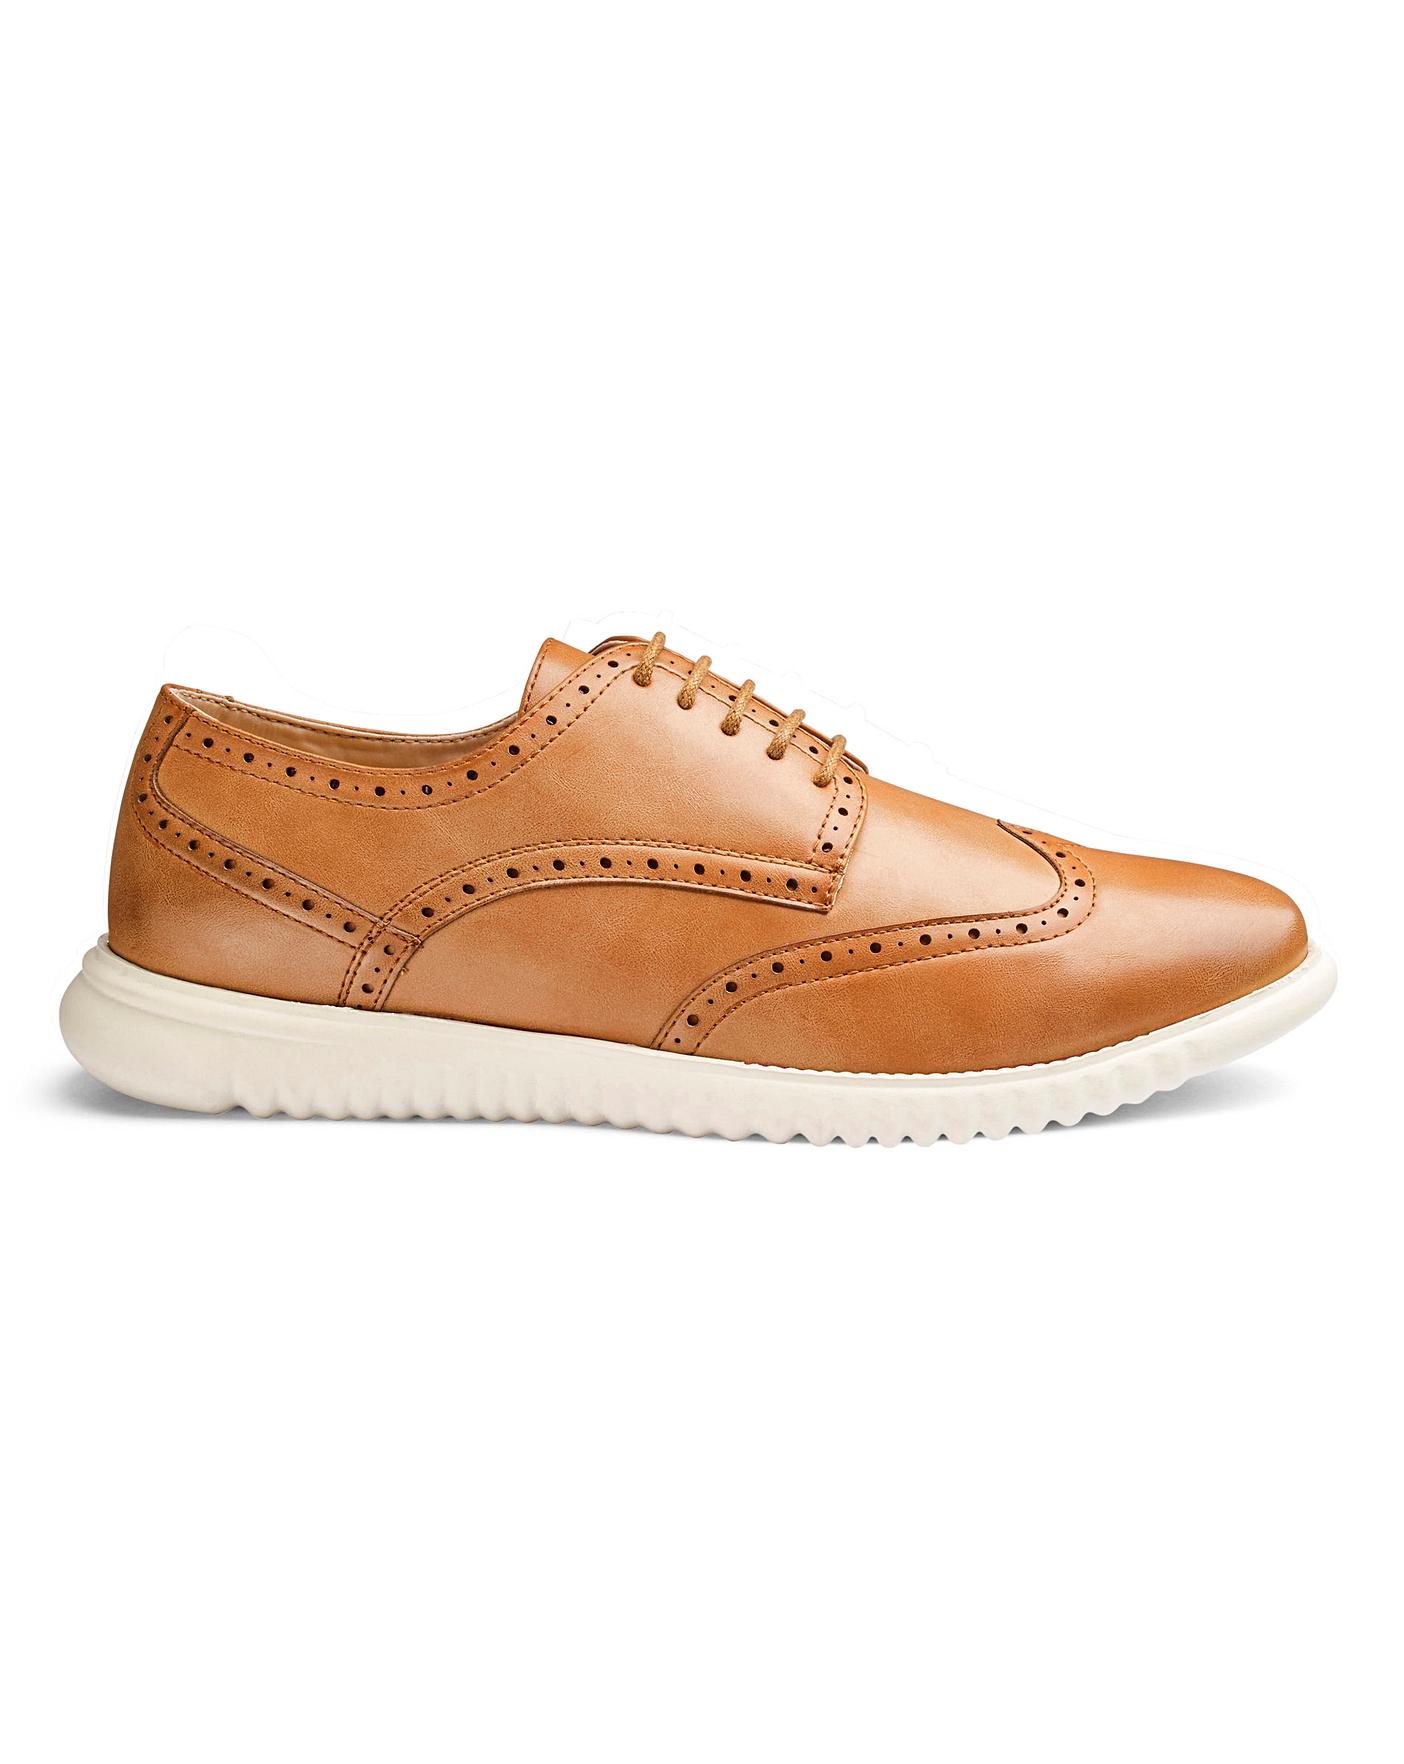 Leather Look Brogues Wide Fit